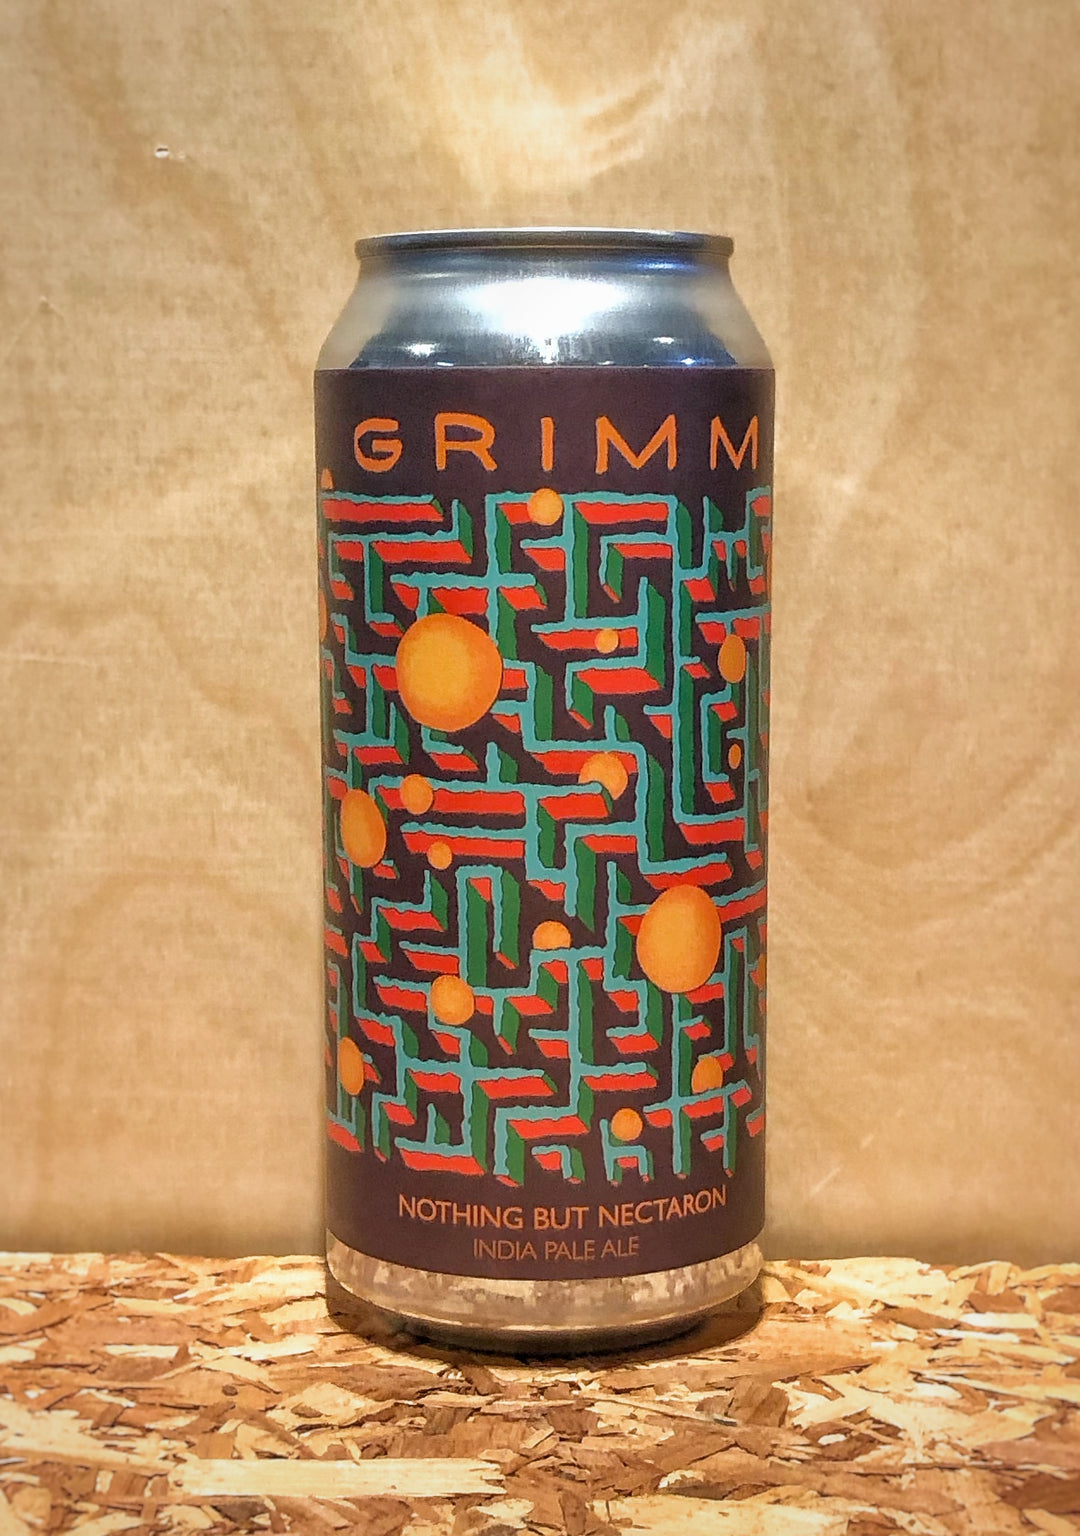 Grimm 'Nothing But Nectaron' India Pale Ale (Brooklyn, NY)